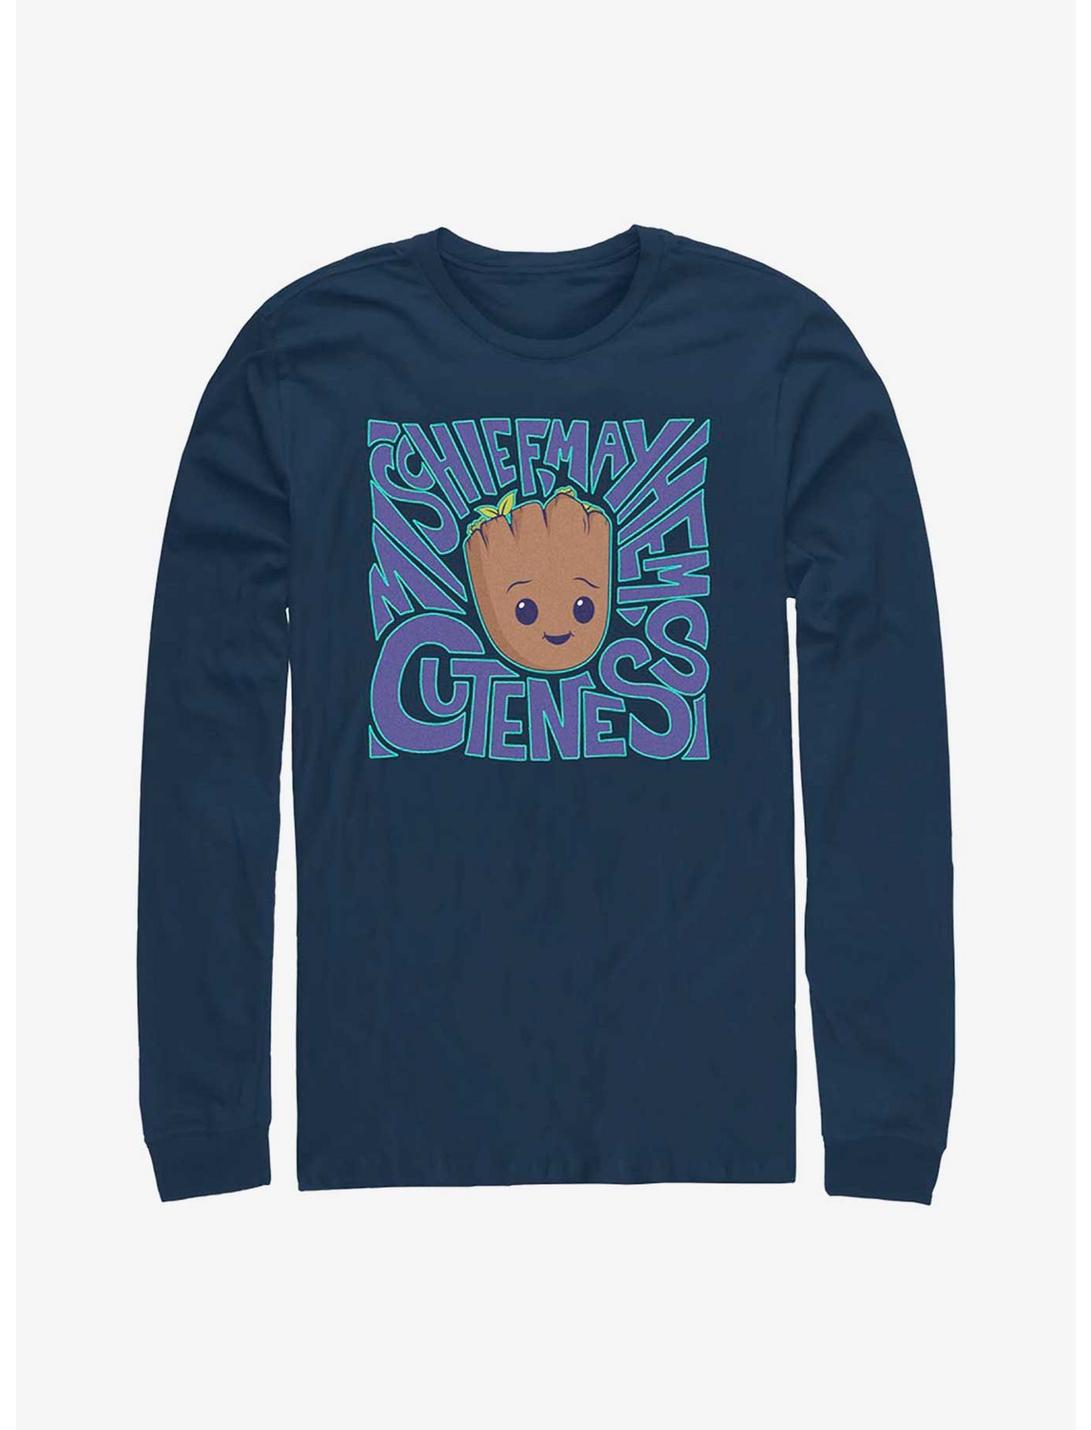 Marvel Guardians of the Galaxy Cuteness Overload Long Sleeve T-Shirt, NAVY, hi-res